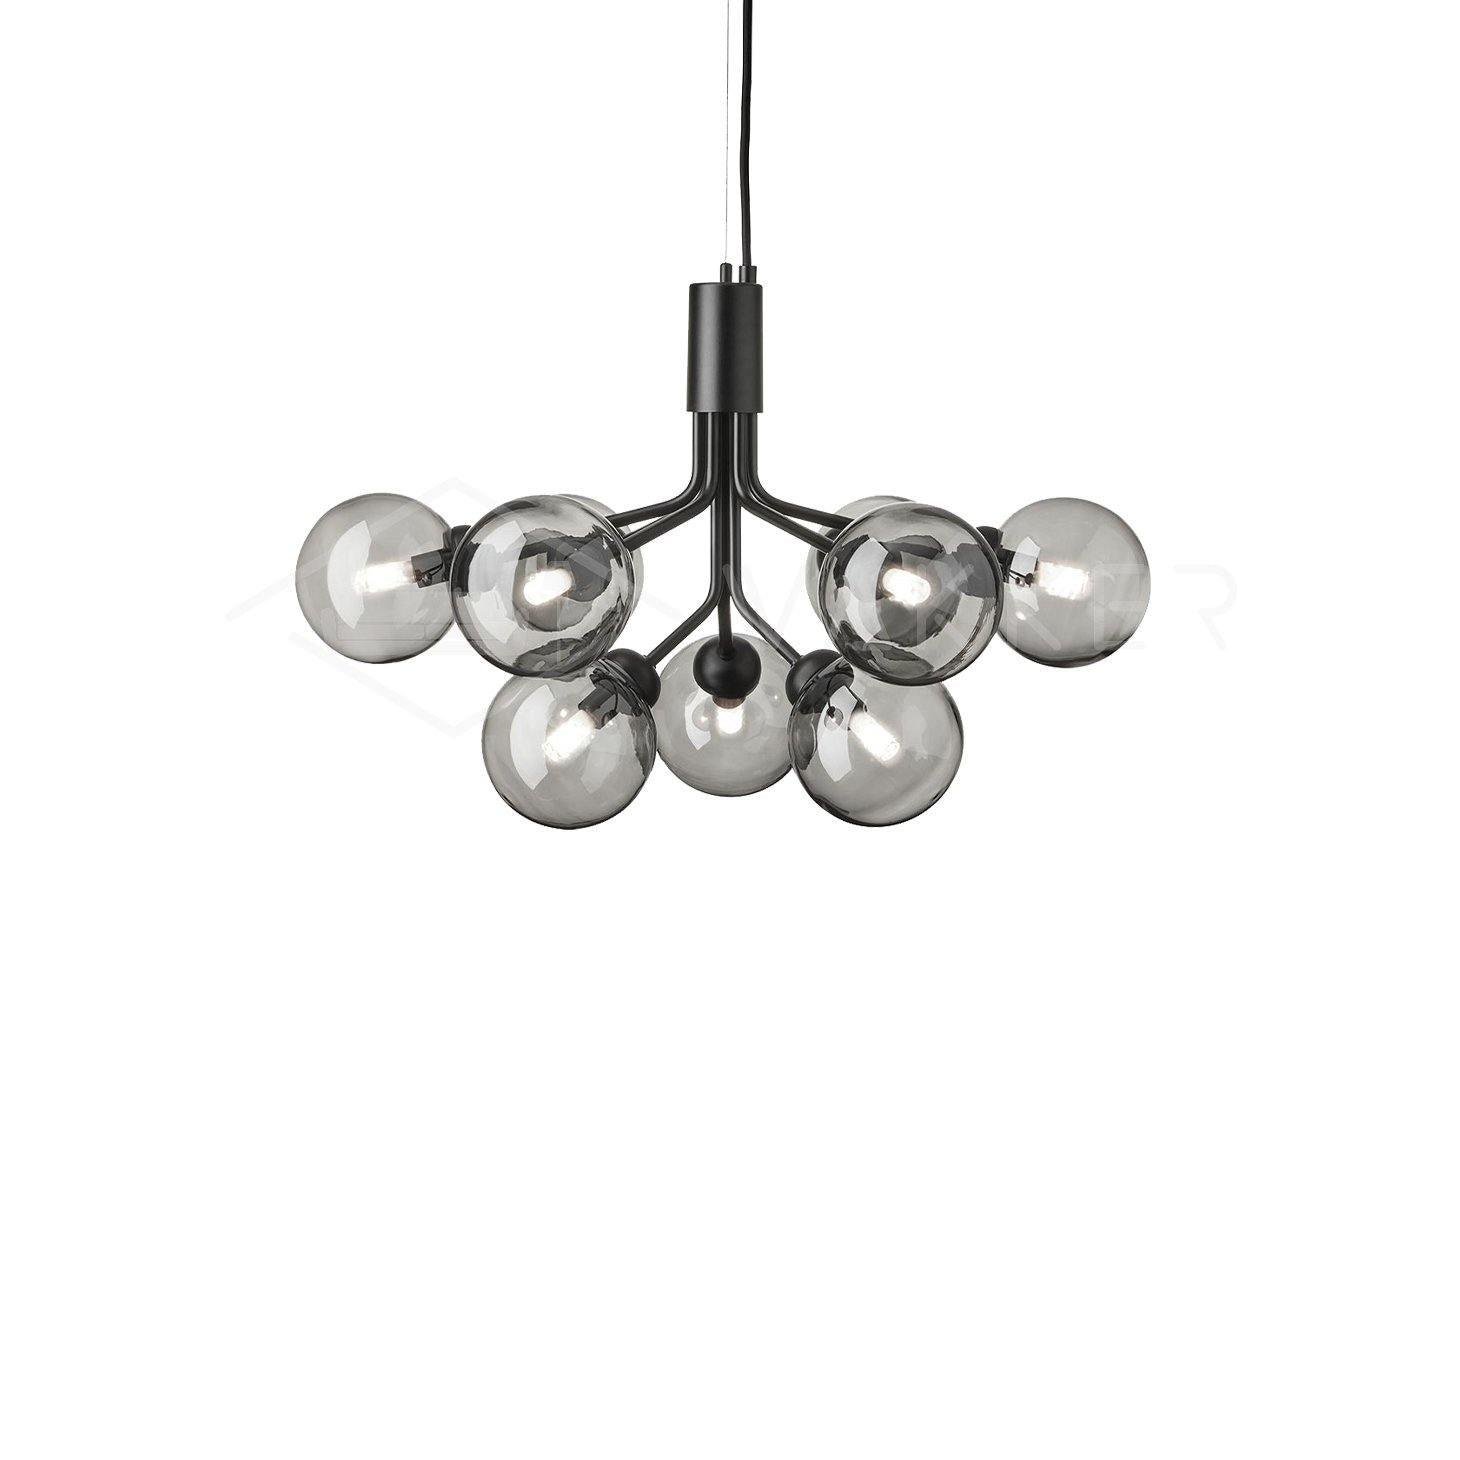 Black Smoky Apiales Chandeliers with 9heads and dimensions ∅ 23.6″ x H 15.8″ (Dia 60cm x H 40cm)